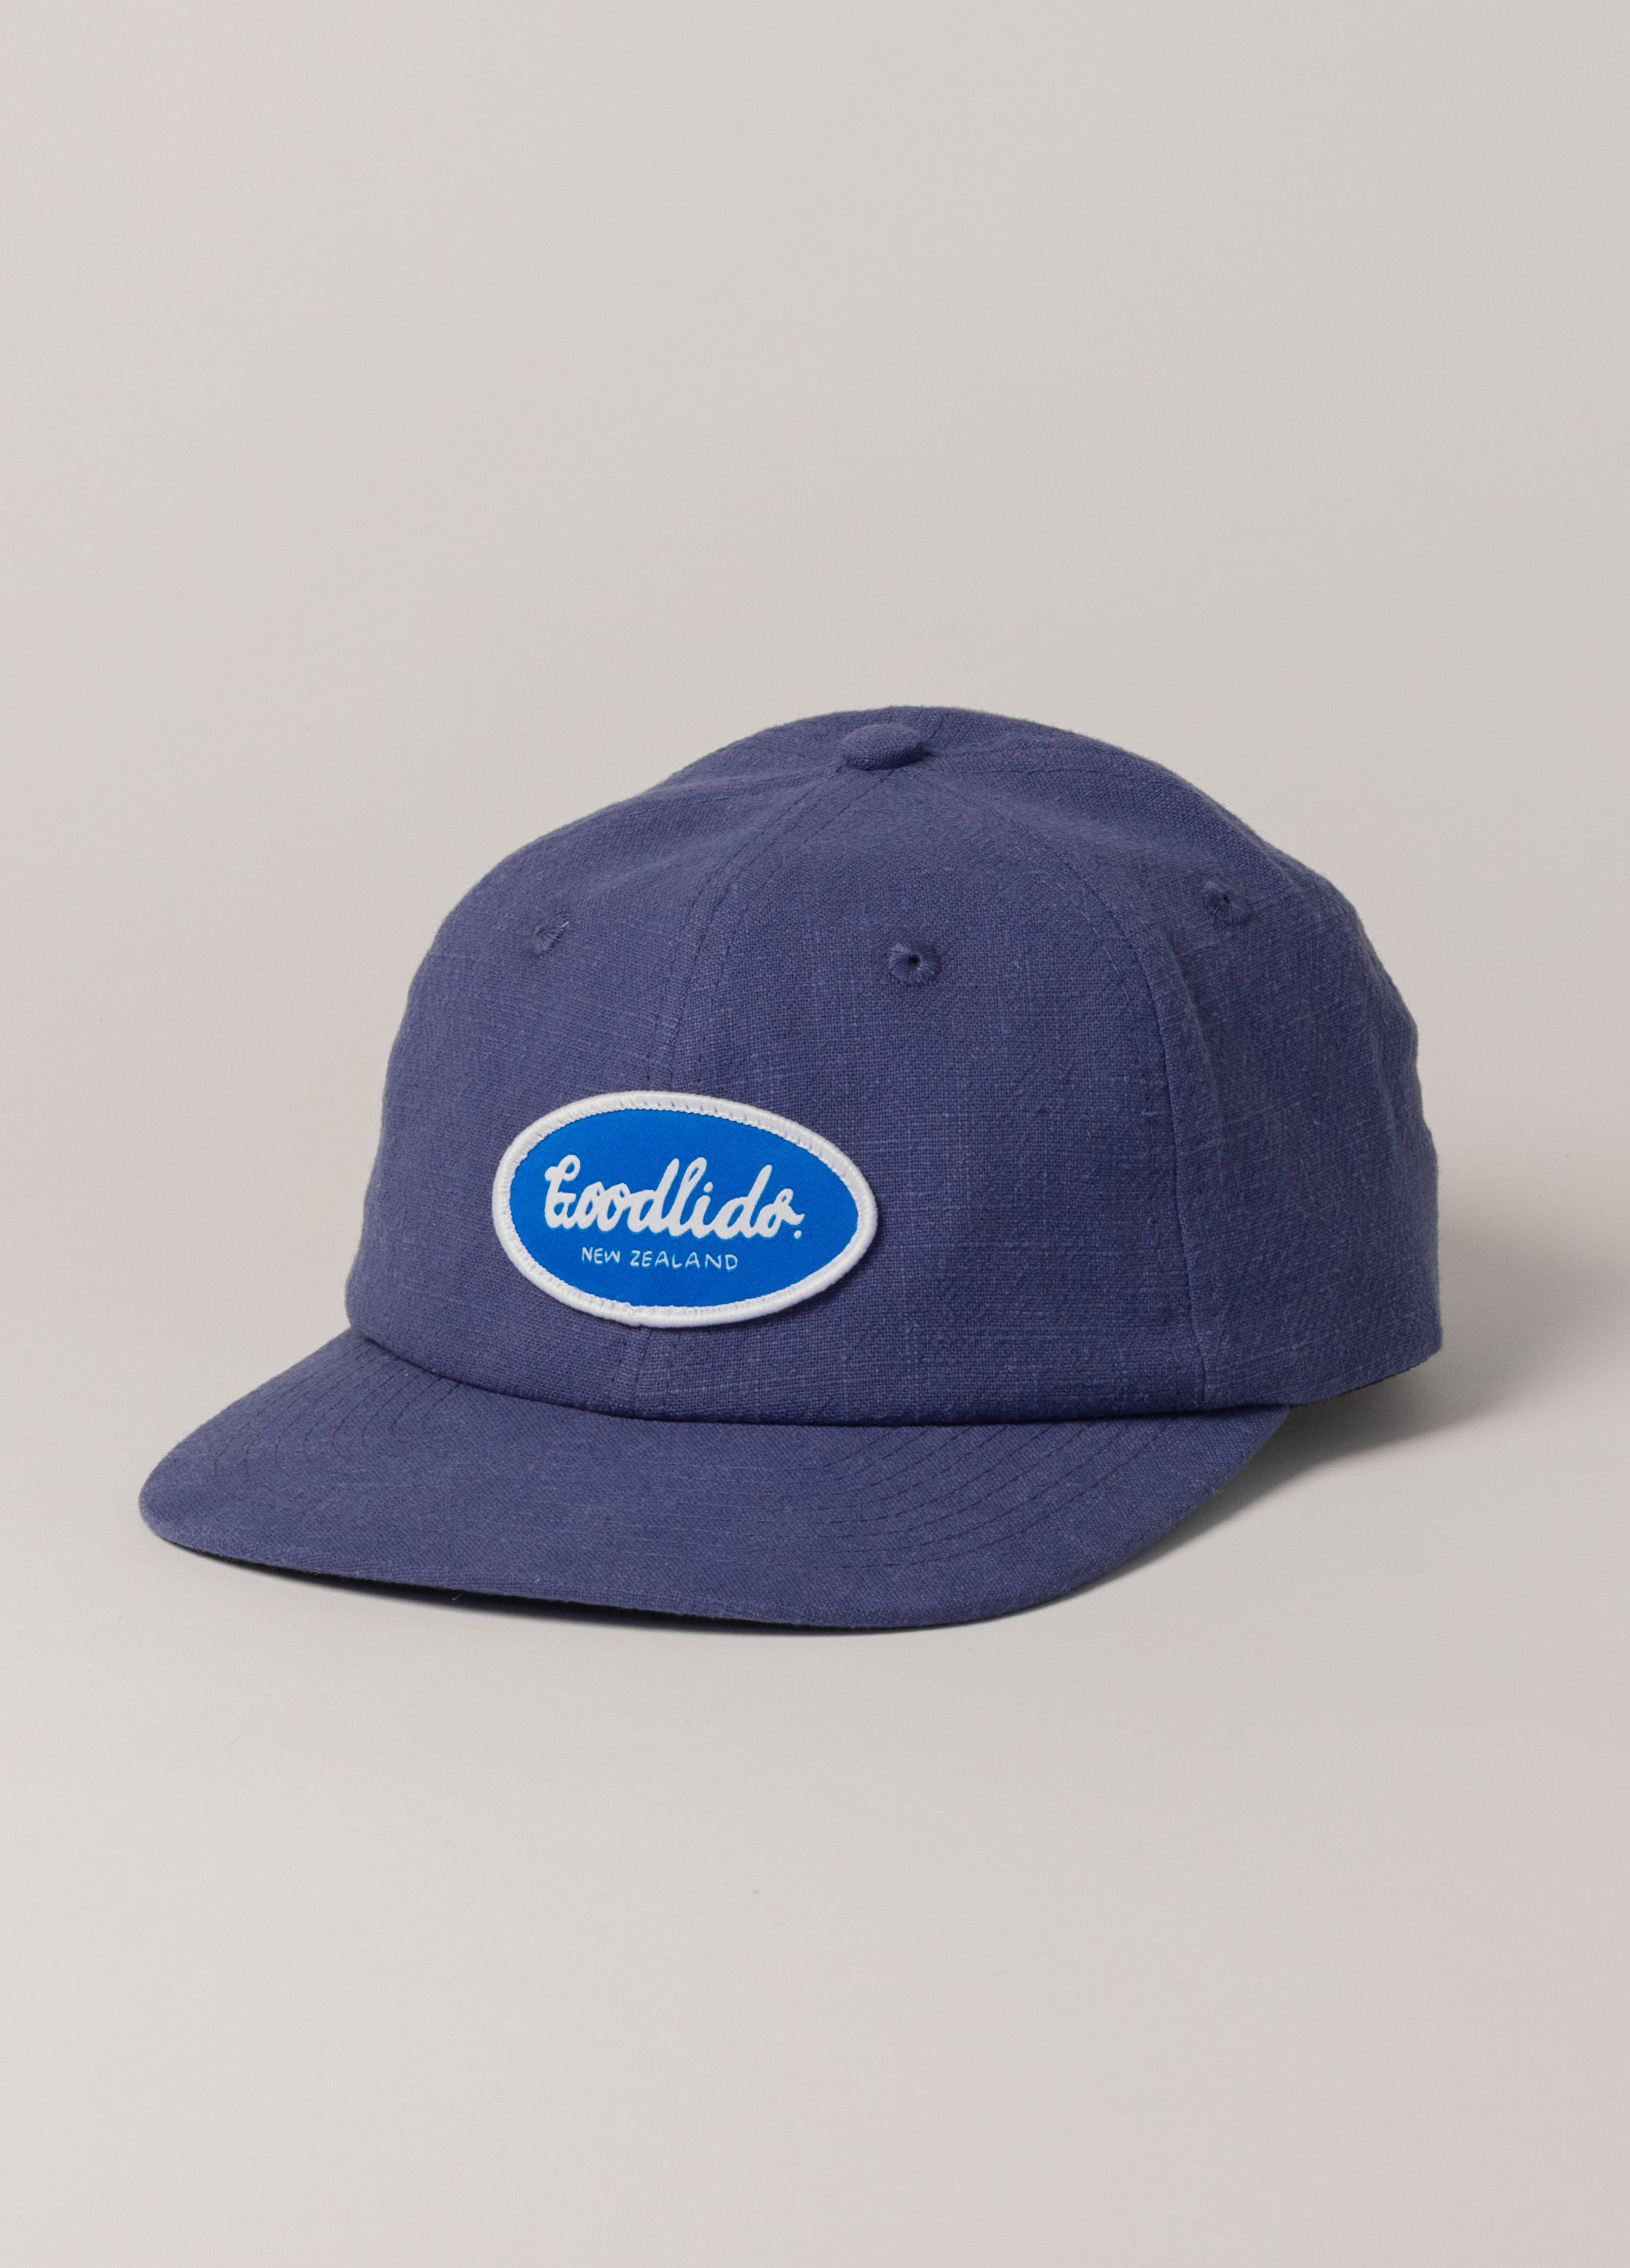 Signature Lid - Washed Navy